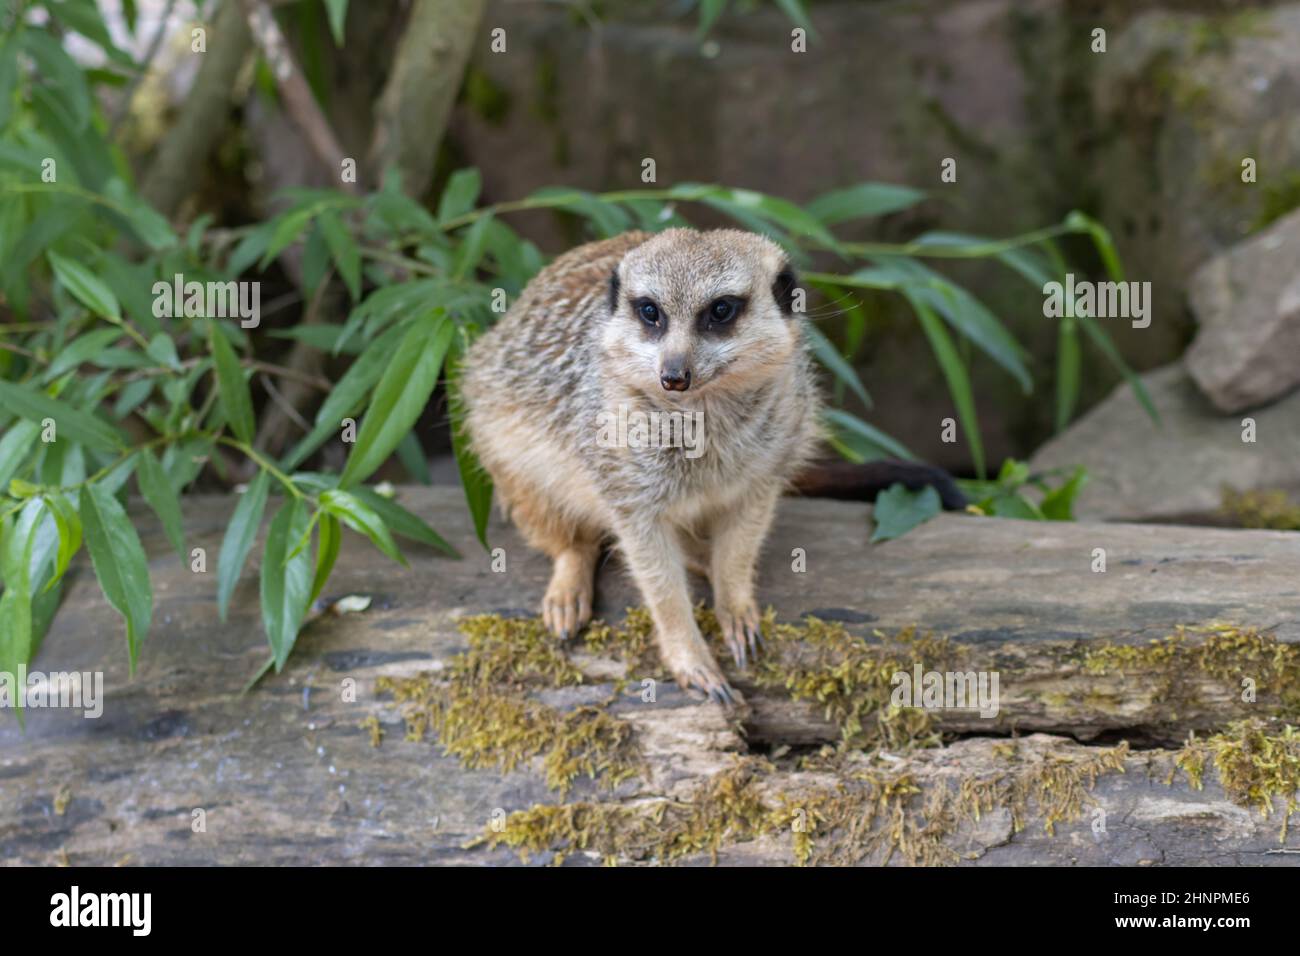 The meerkat (Suricata suricatta), also called Surikate or outdated Scharrtier, is a species of mammal from the mongoose family (Herpestidae). Stock Photo